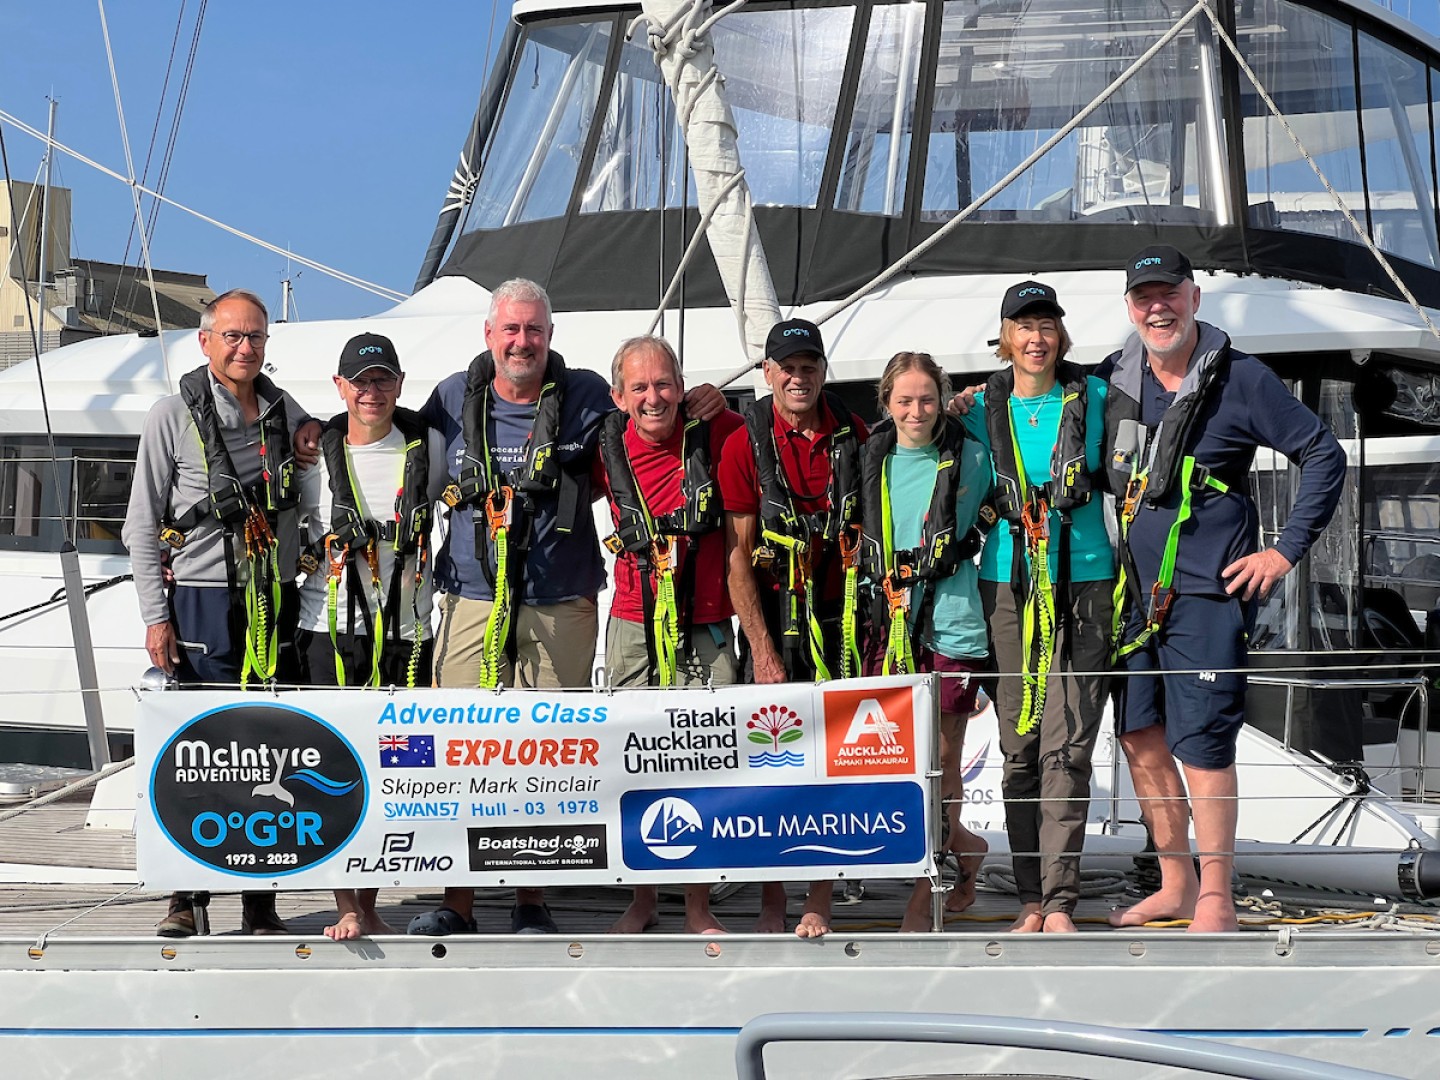 Crew of Explorer AU (28) slip lines for 1,500nm race qualifier. One crew spot available on Leg 1 Southampton to Cape Town. (OGR2023 Sayula Class Entry) Photo Credit: Don McIntyre/ OGR2023